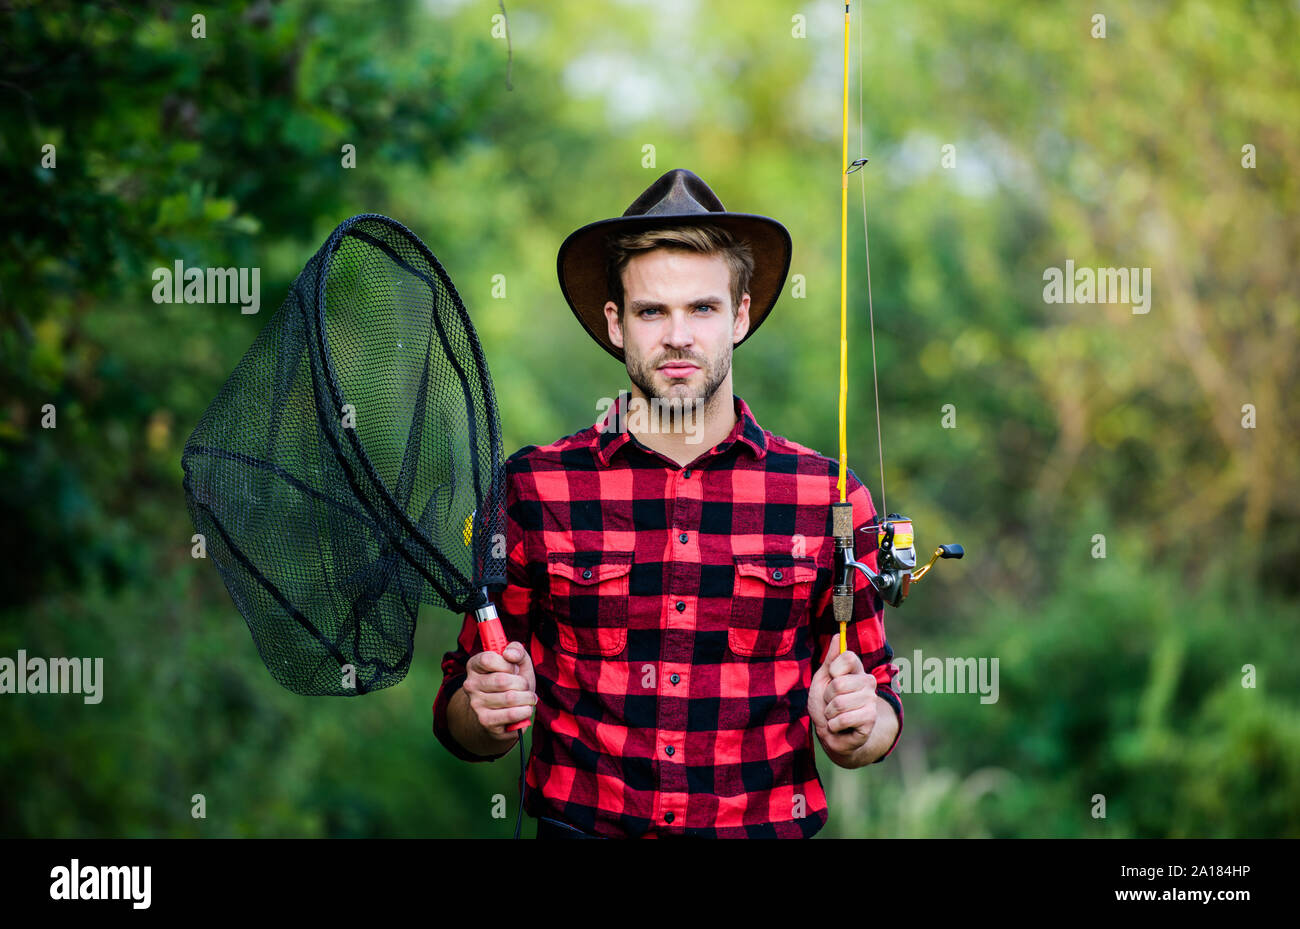 https://c8.alamy.com/comp/2A184HP/casting-off-serious-man-in-cowboy-hat-western-portrait-vintage-style-man-wild-west-retro-cowboy-fly-fishing-man-checkered-shirt-on-ranch-fisher-hold-fish-net-hobby-fisherman-with-fishing-rod-2A184HP.jpg